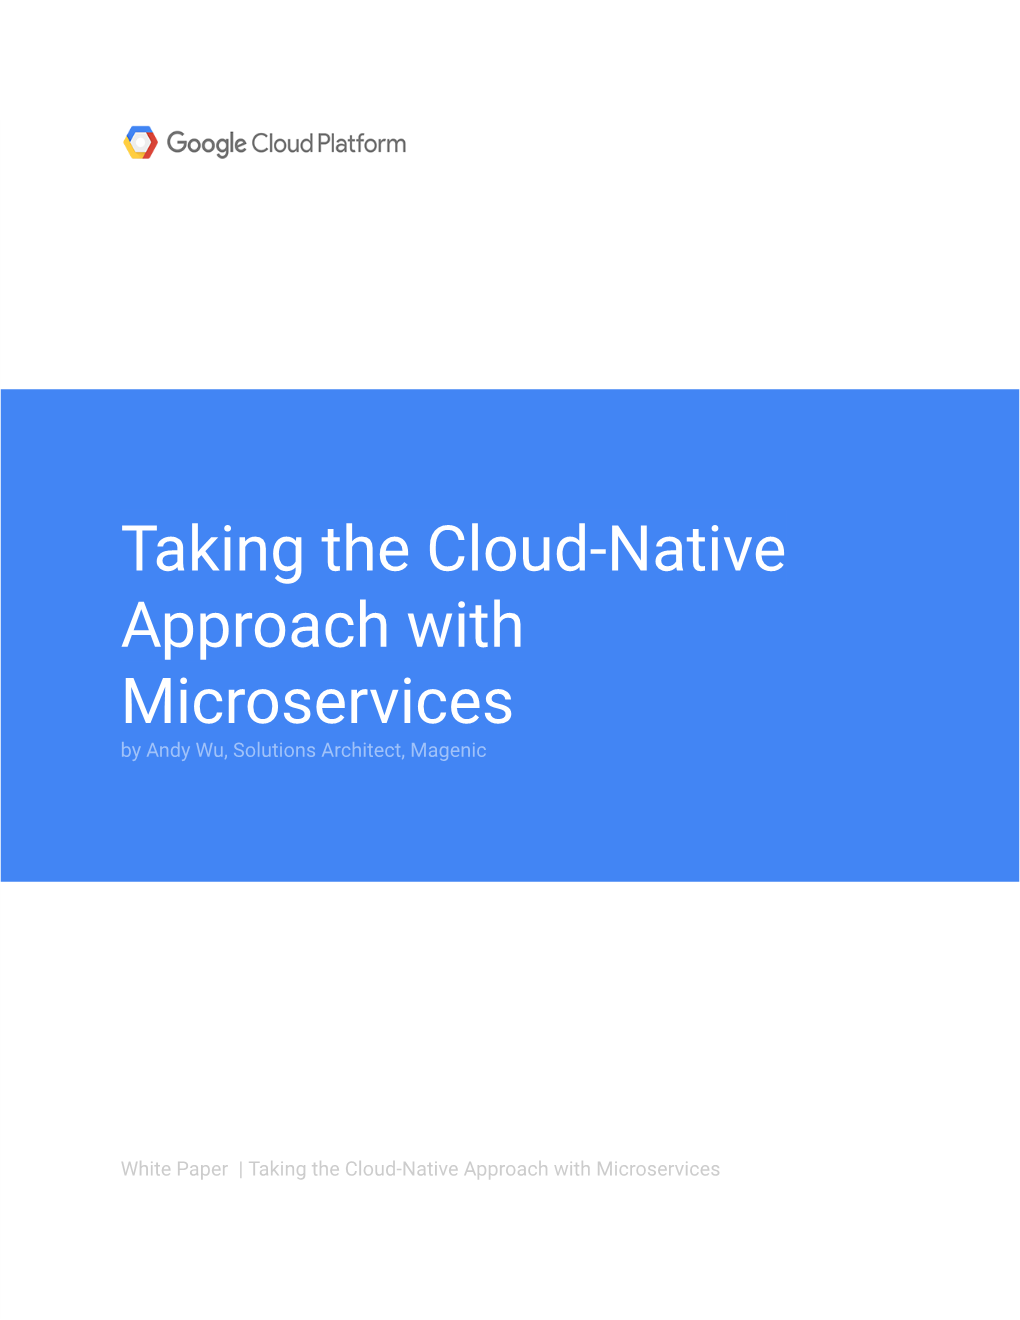 Taking the Cloud-Native Approach with Microservices by Andy Wu, Solutions Architect, Magenic